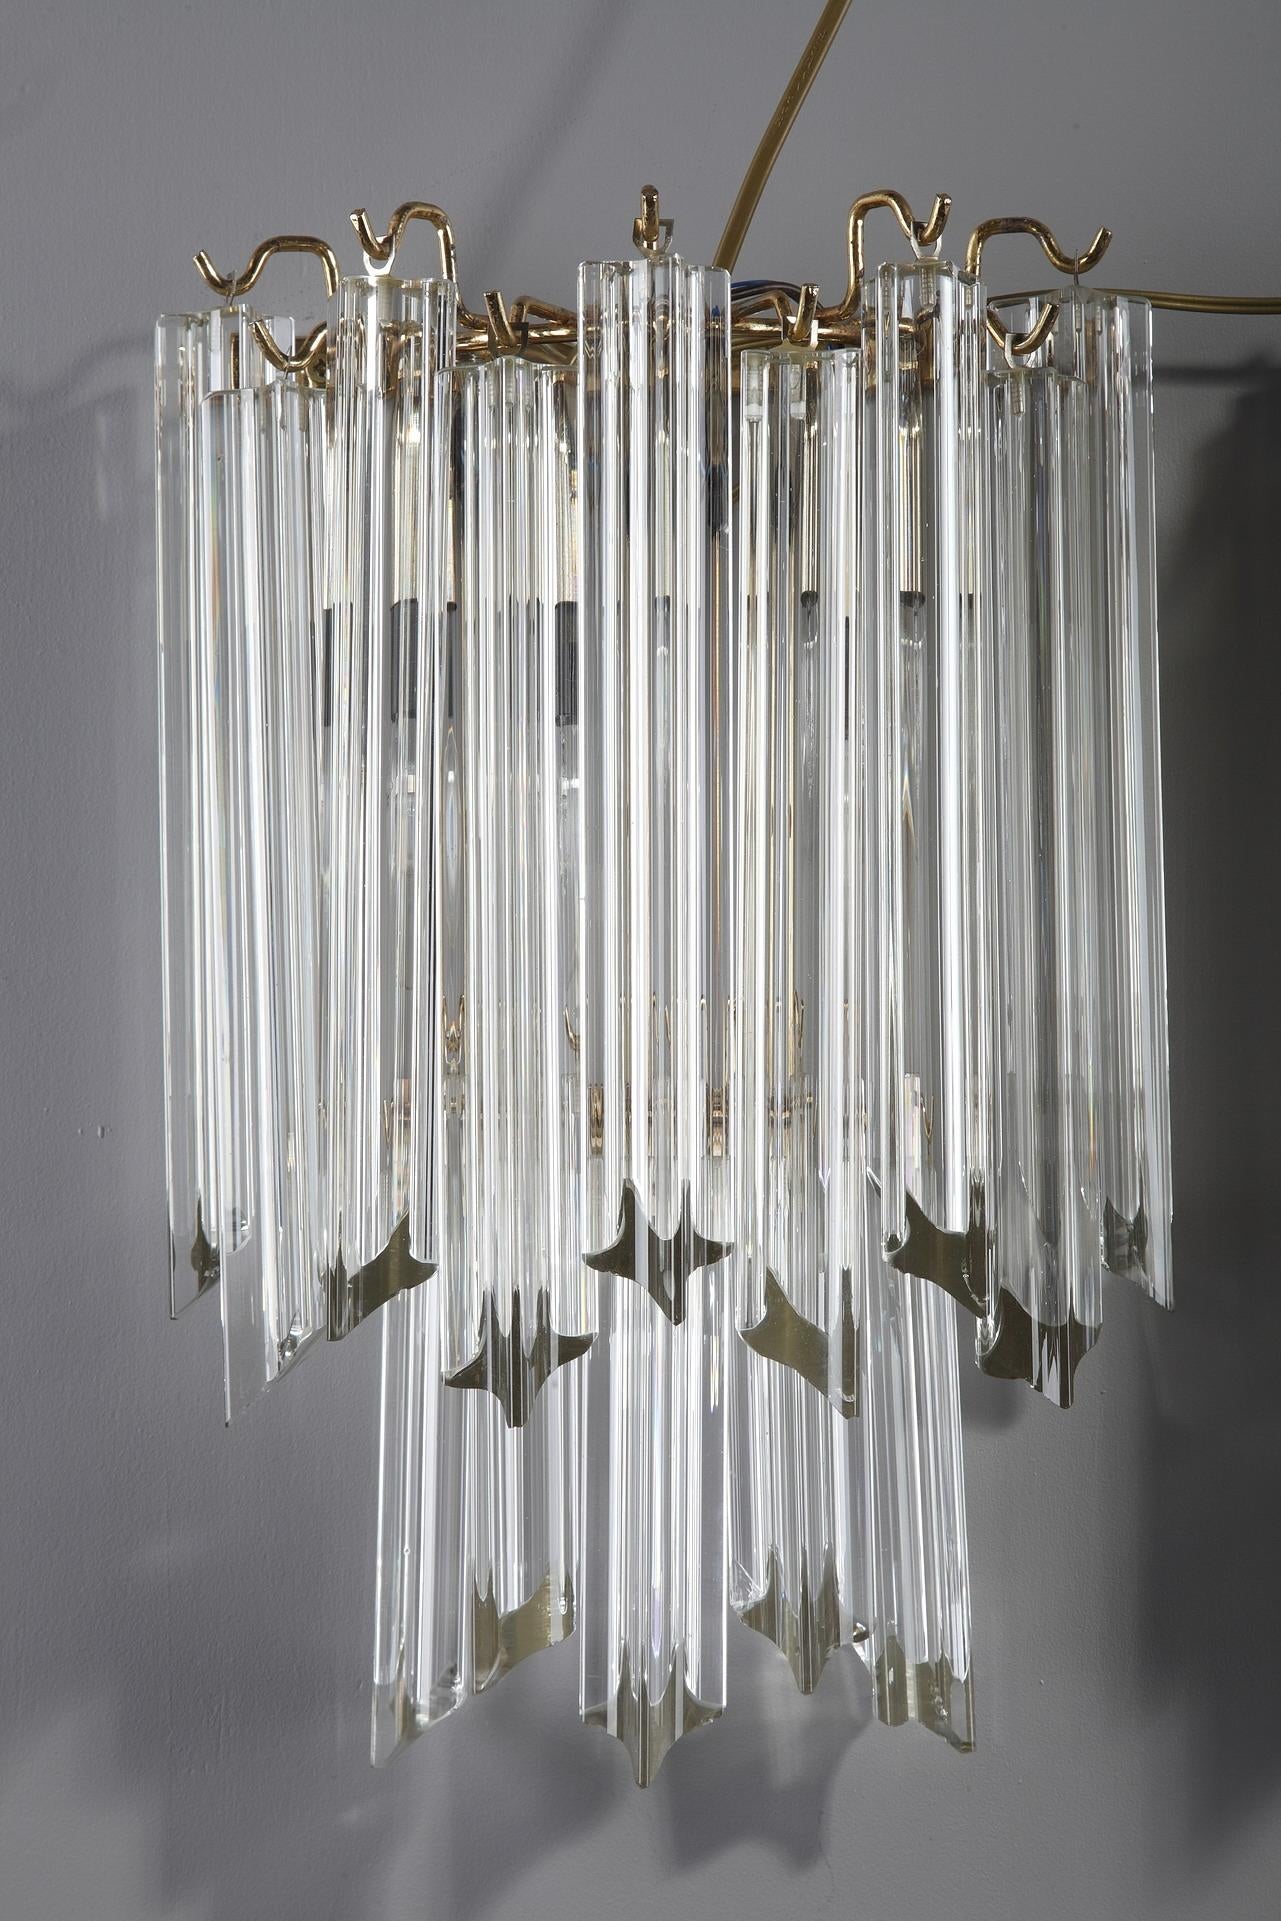 Pair of Italian Venini wall lights sconces with two lights. Each one is decorated with long clear Murano glass pendants on a gilt metal structure,

circa 1960
Dimensions: W 9.4 in, D 5.1in, H 15.4in.
Dimensions: L 24cm, P 13cm, H 39cm.